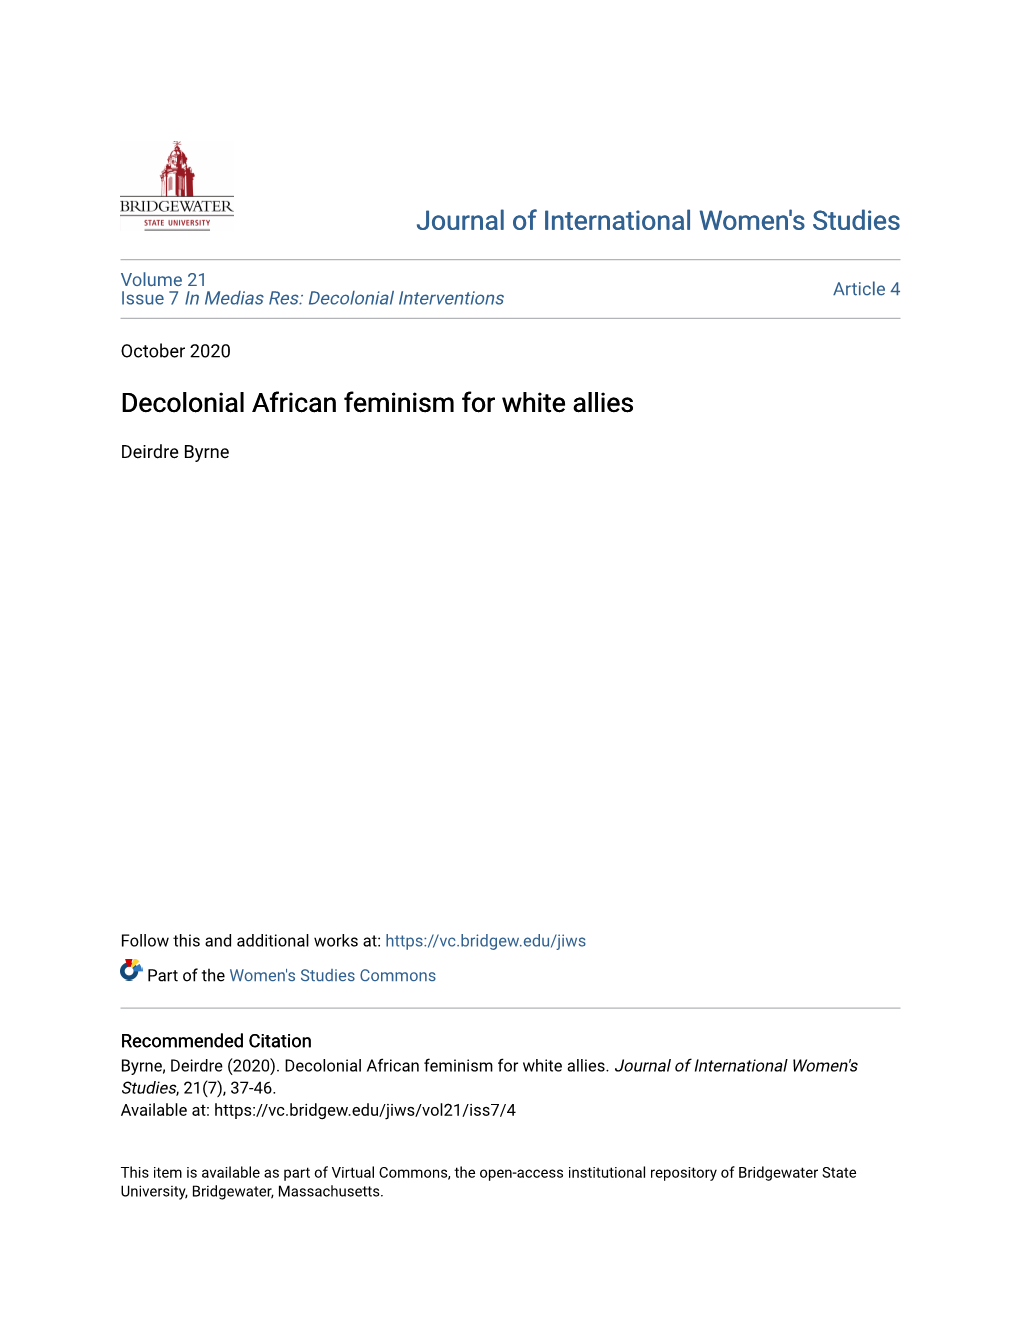 Decolonial African Feminism for White Allies